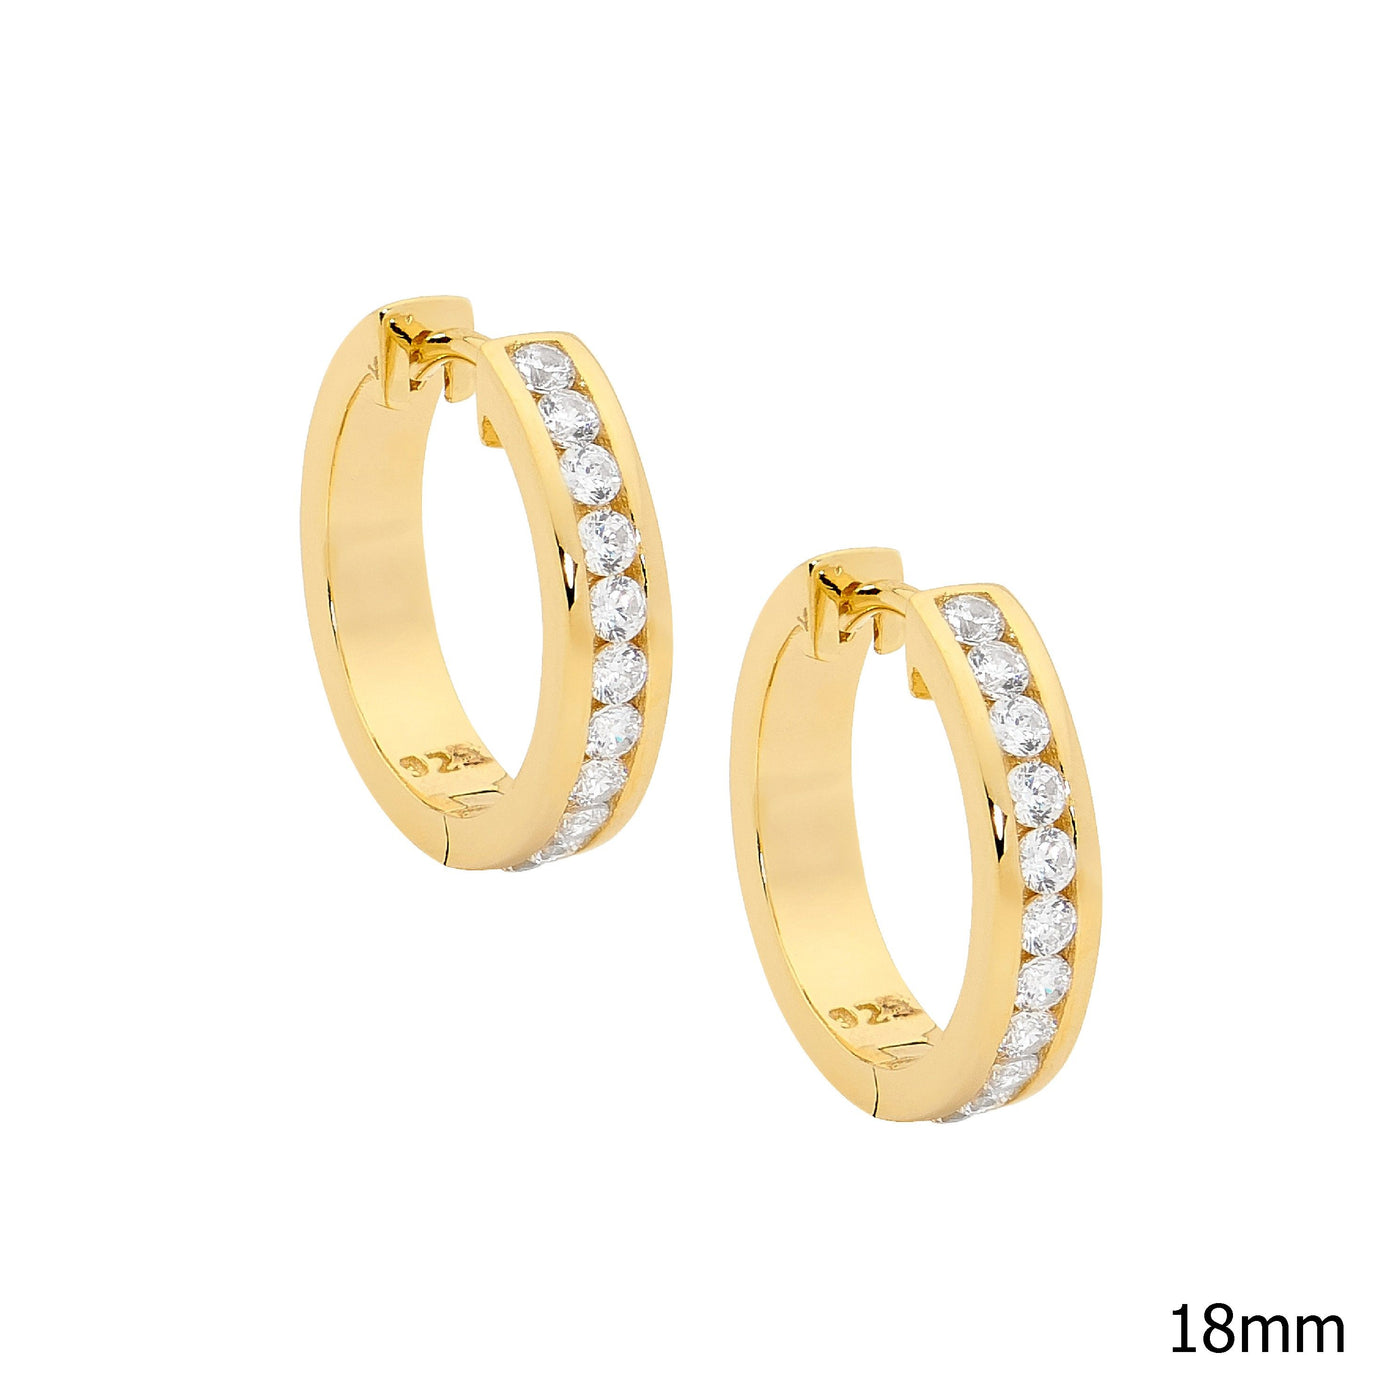 Sterling Silver Gold Plated 18m Hoop Earrings With Channel Set White Cubic Zirconias